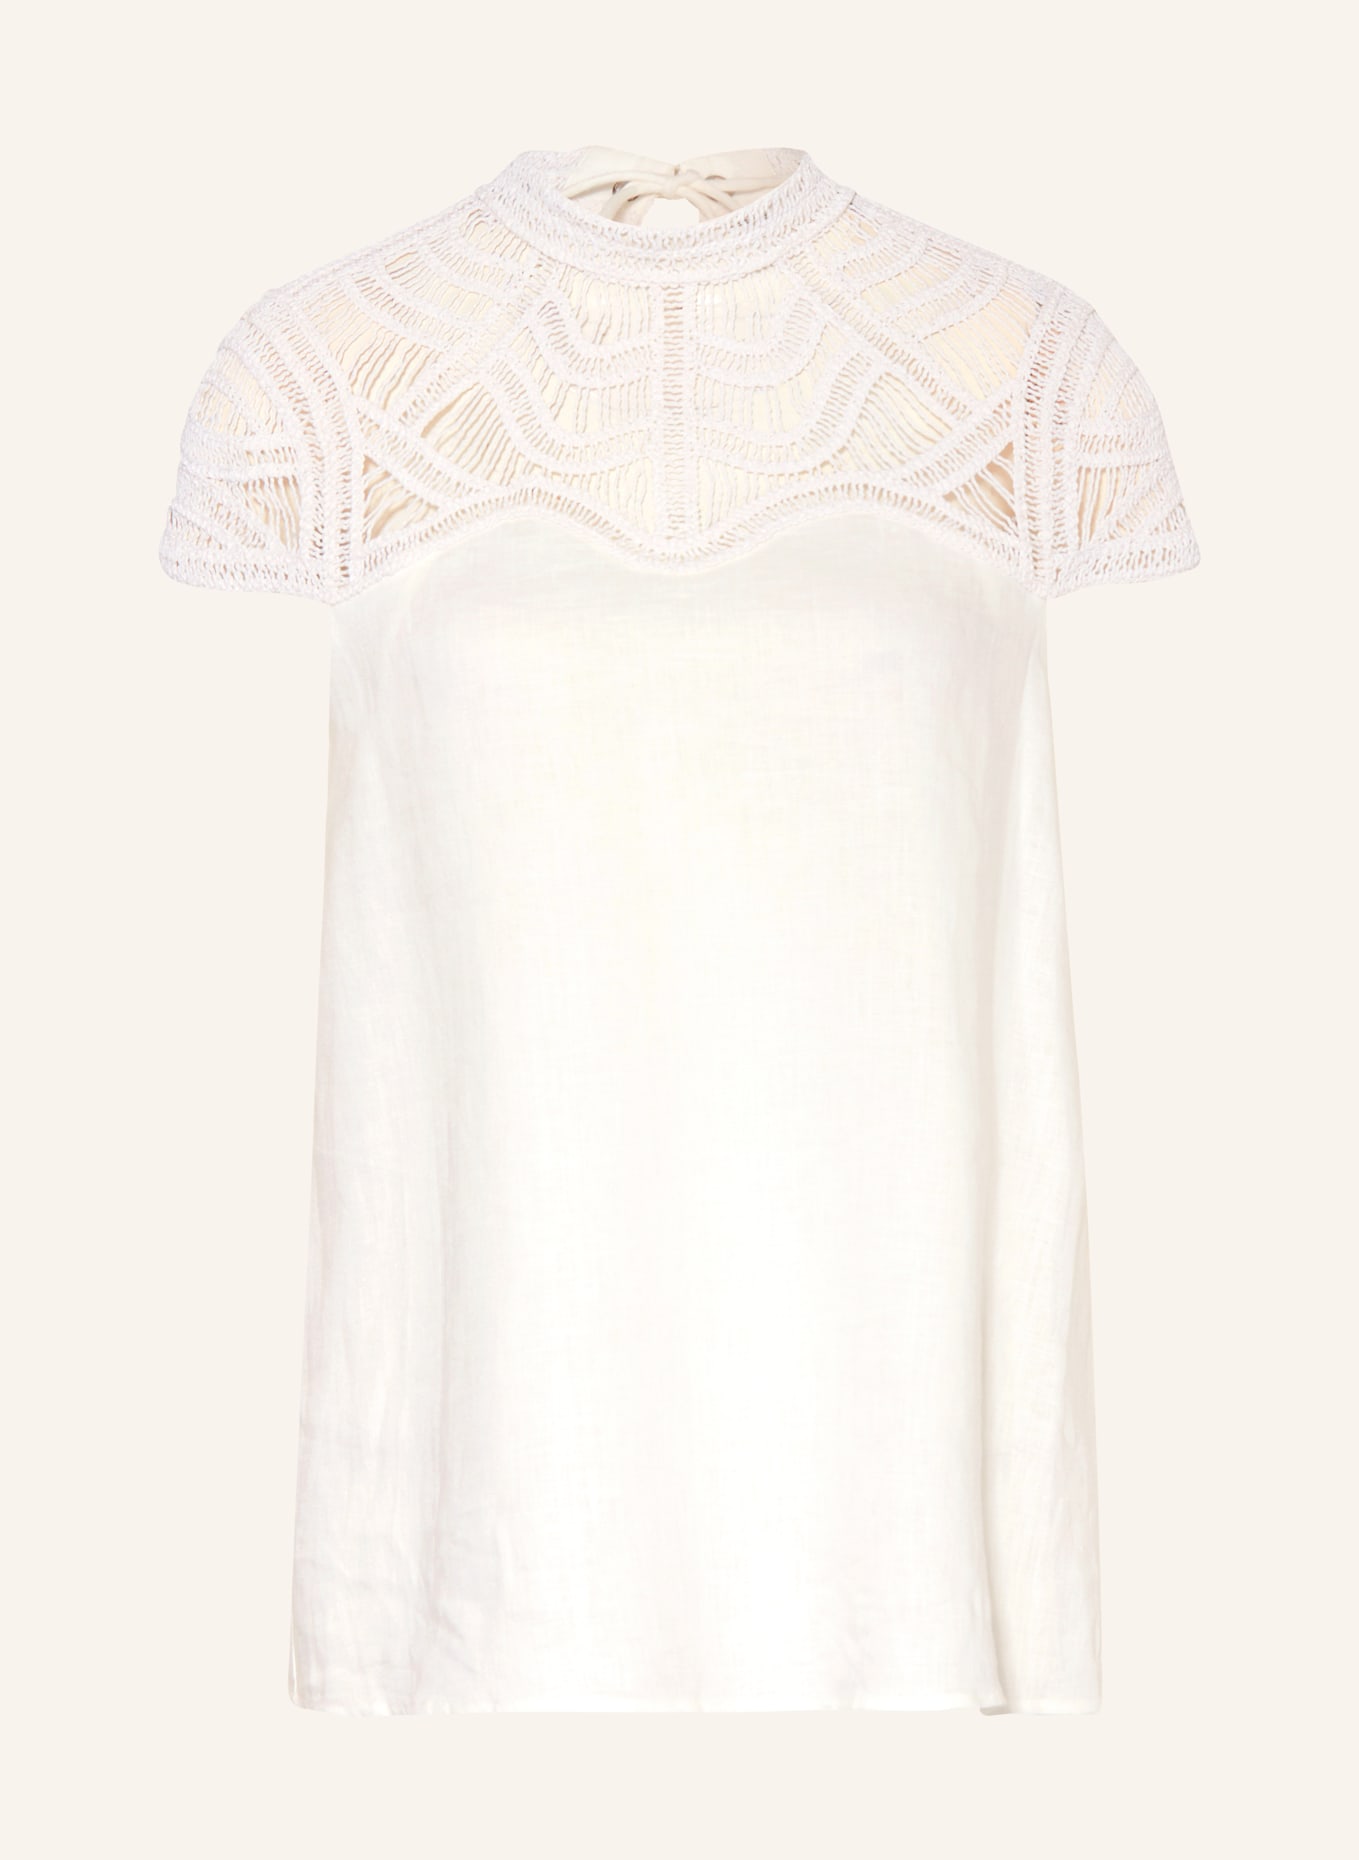 RIANI Shirt blouse made of linen with lace, Color: WHITE (Image 1)